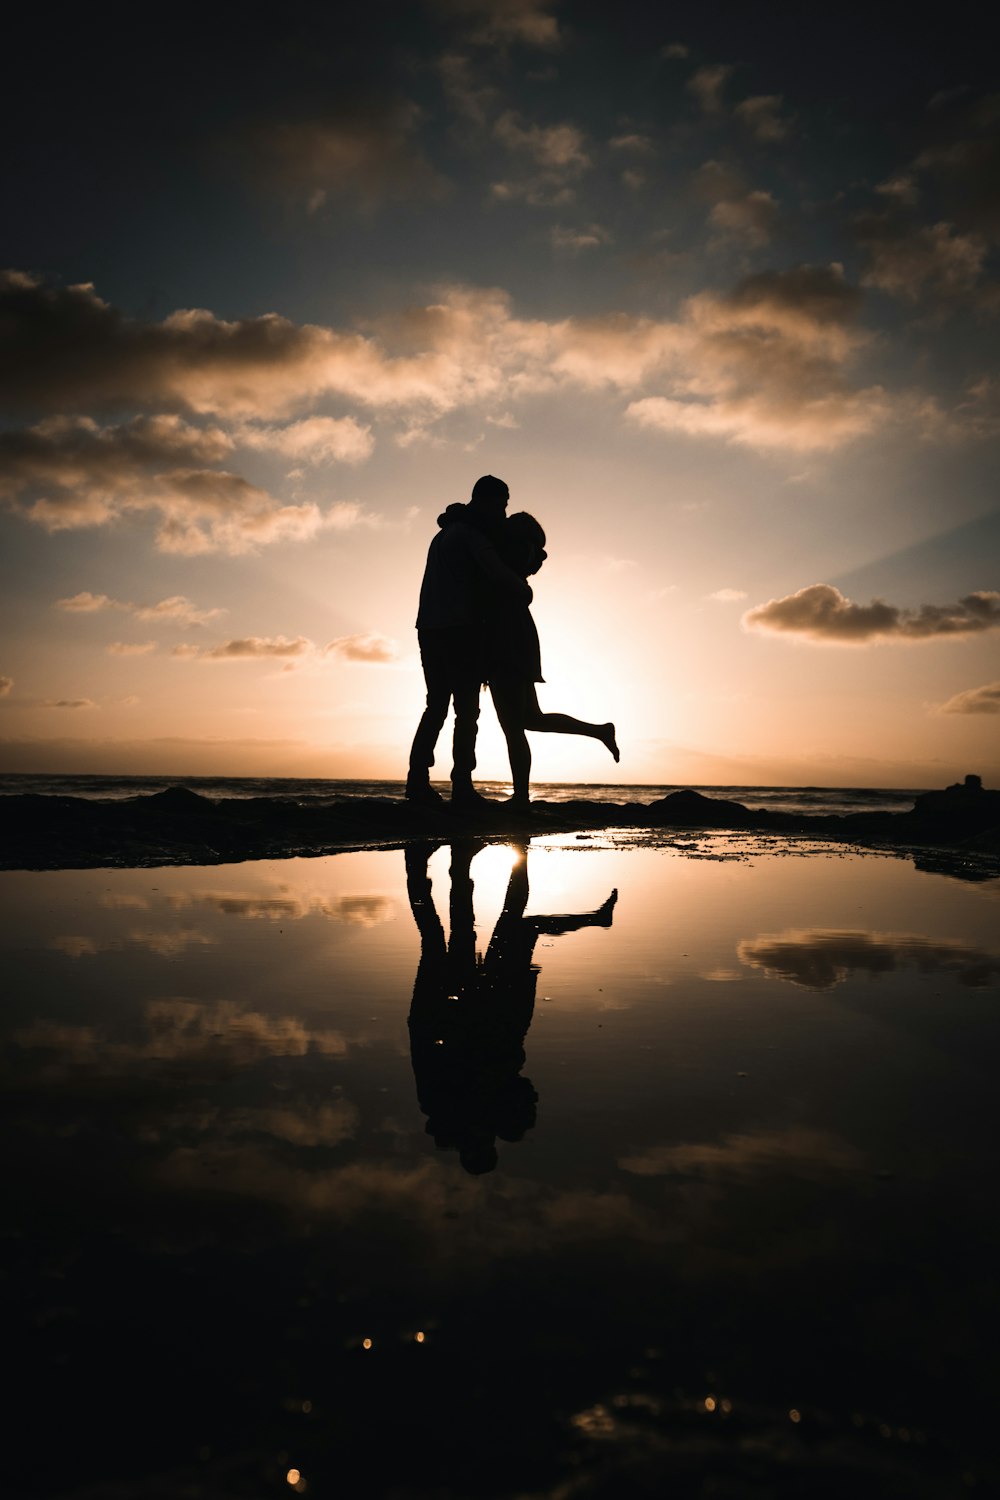 100+ Cute Couple Pictures  Download Free Images on Unsplash